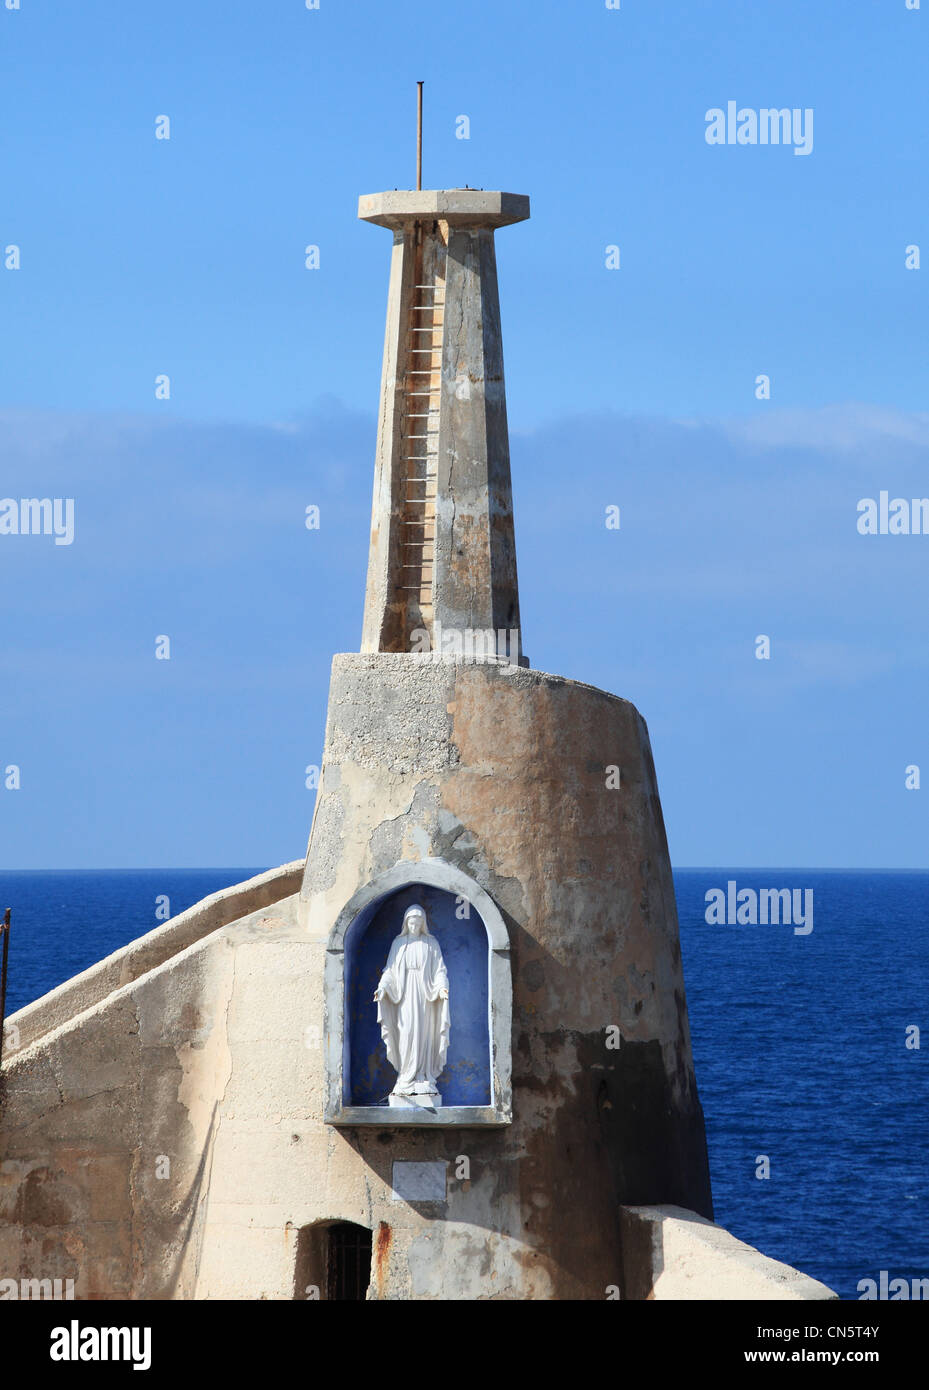 Statue of the Virgin Mary  at the corner of Cirkewwa harbour which is the terminal for the Malta Gozo ferry within Malta. Stock Photo